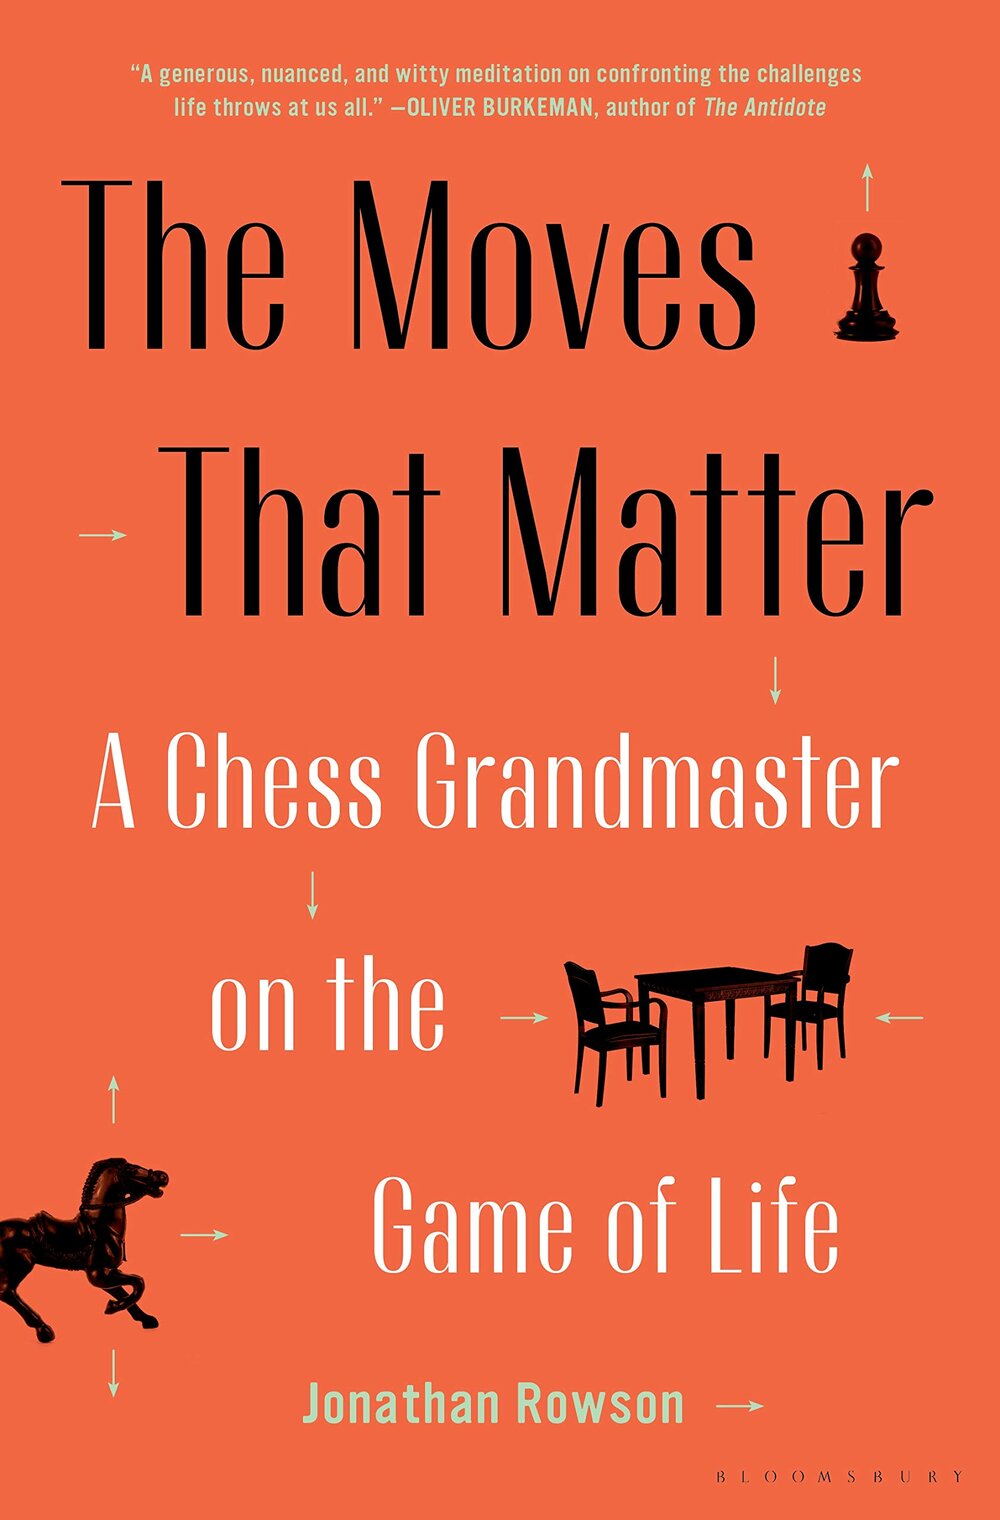 The Moves That Matter: A Chess Grandmaster on the Game of Life by Jonathan Rowson